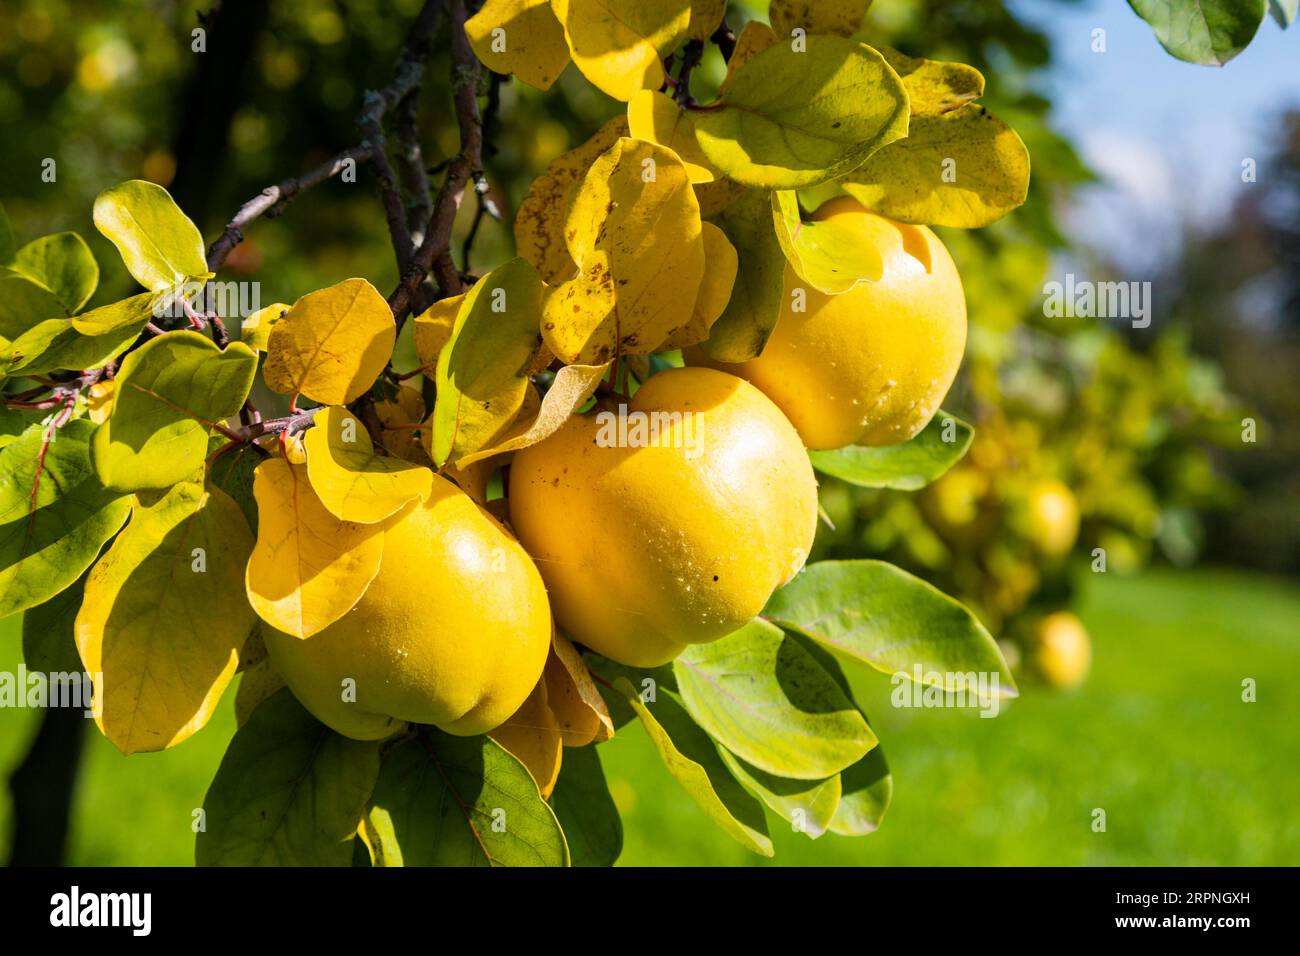 The quince is the only plant species of the genus Cydonia and belongs to the sub-tribe of the pome fruit family within the rose family. It is Stock Photo